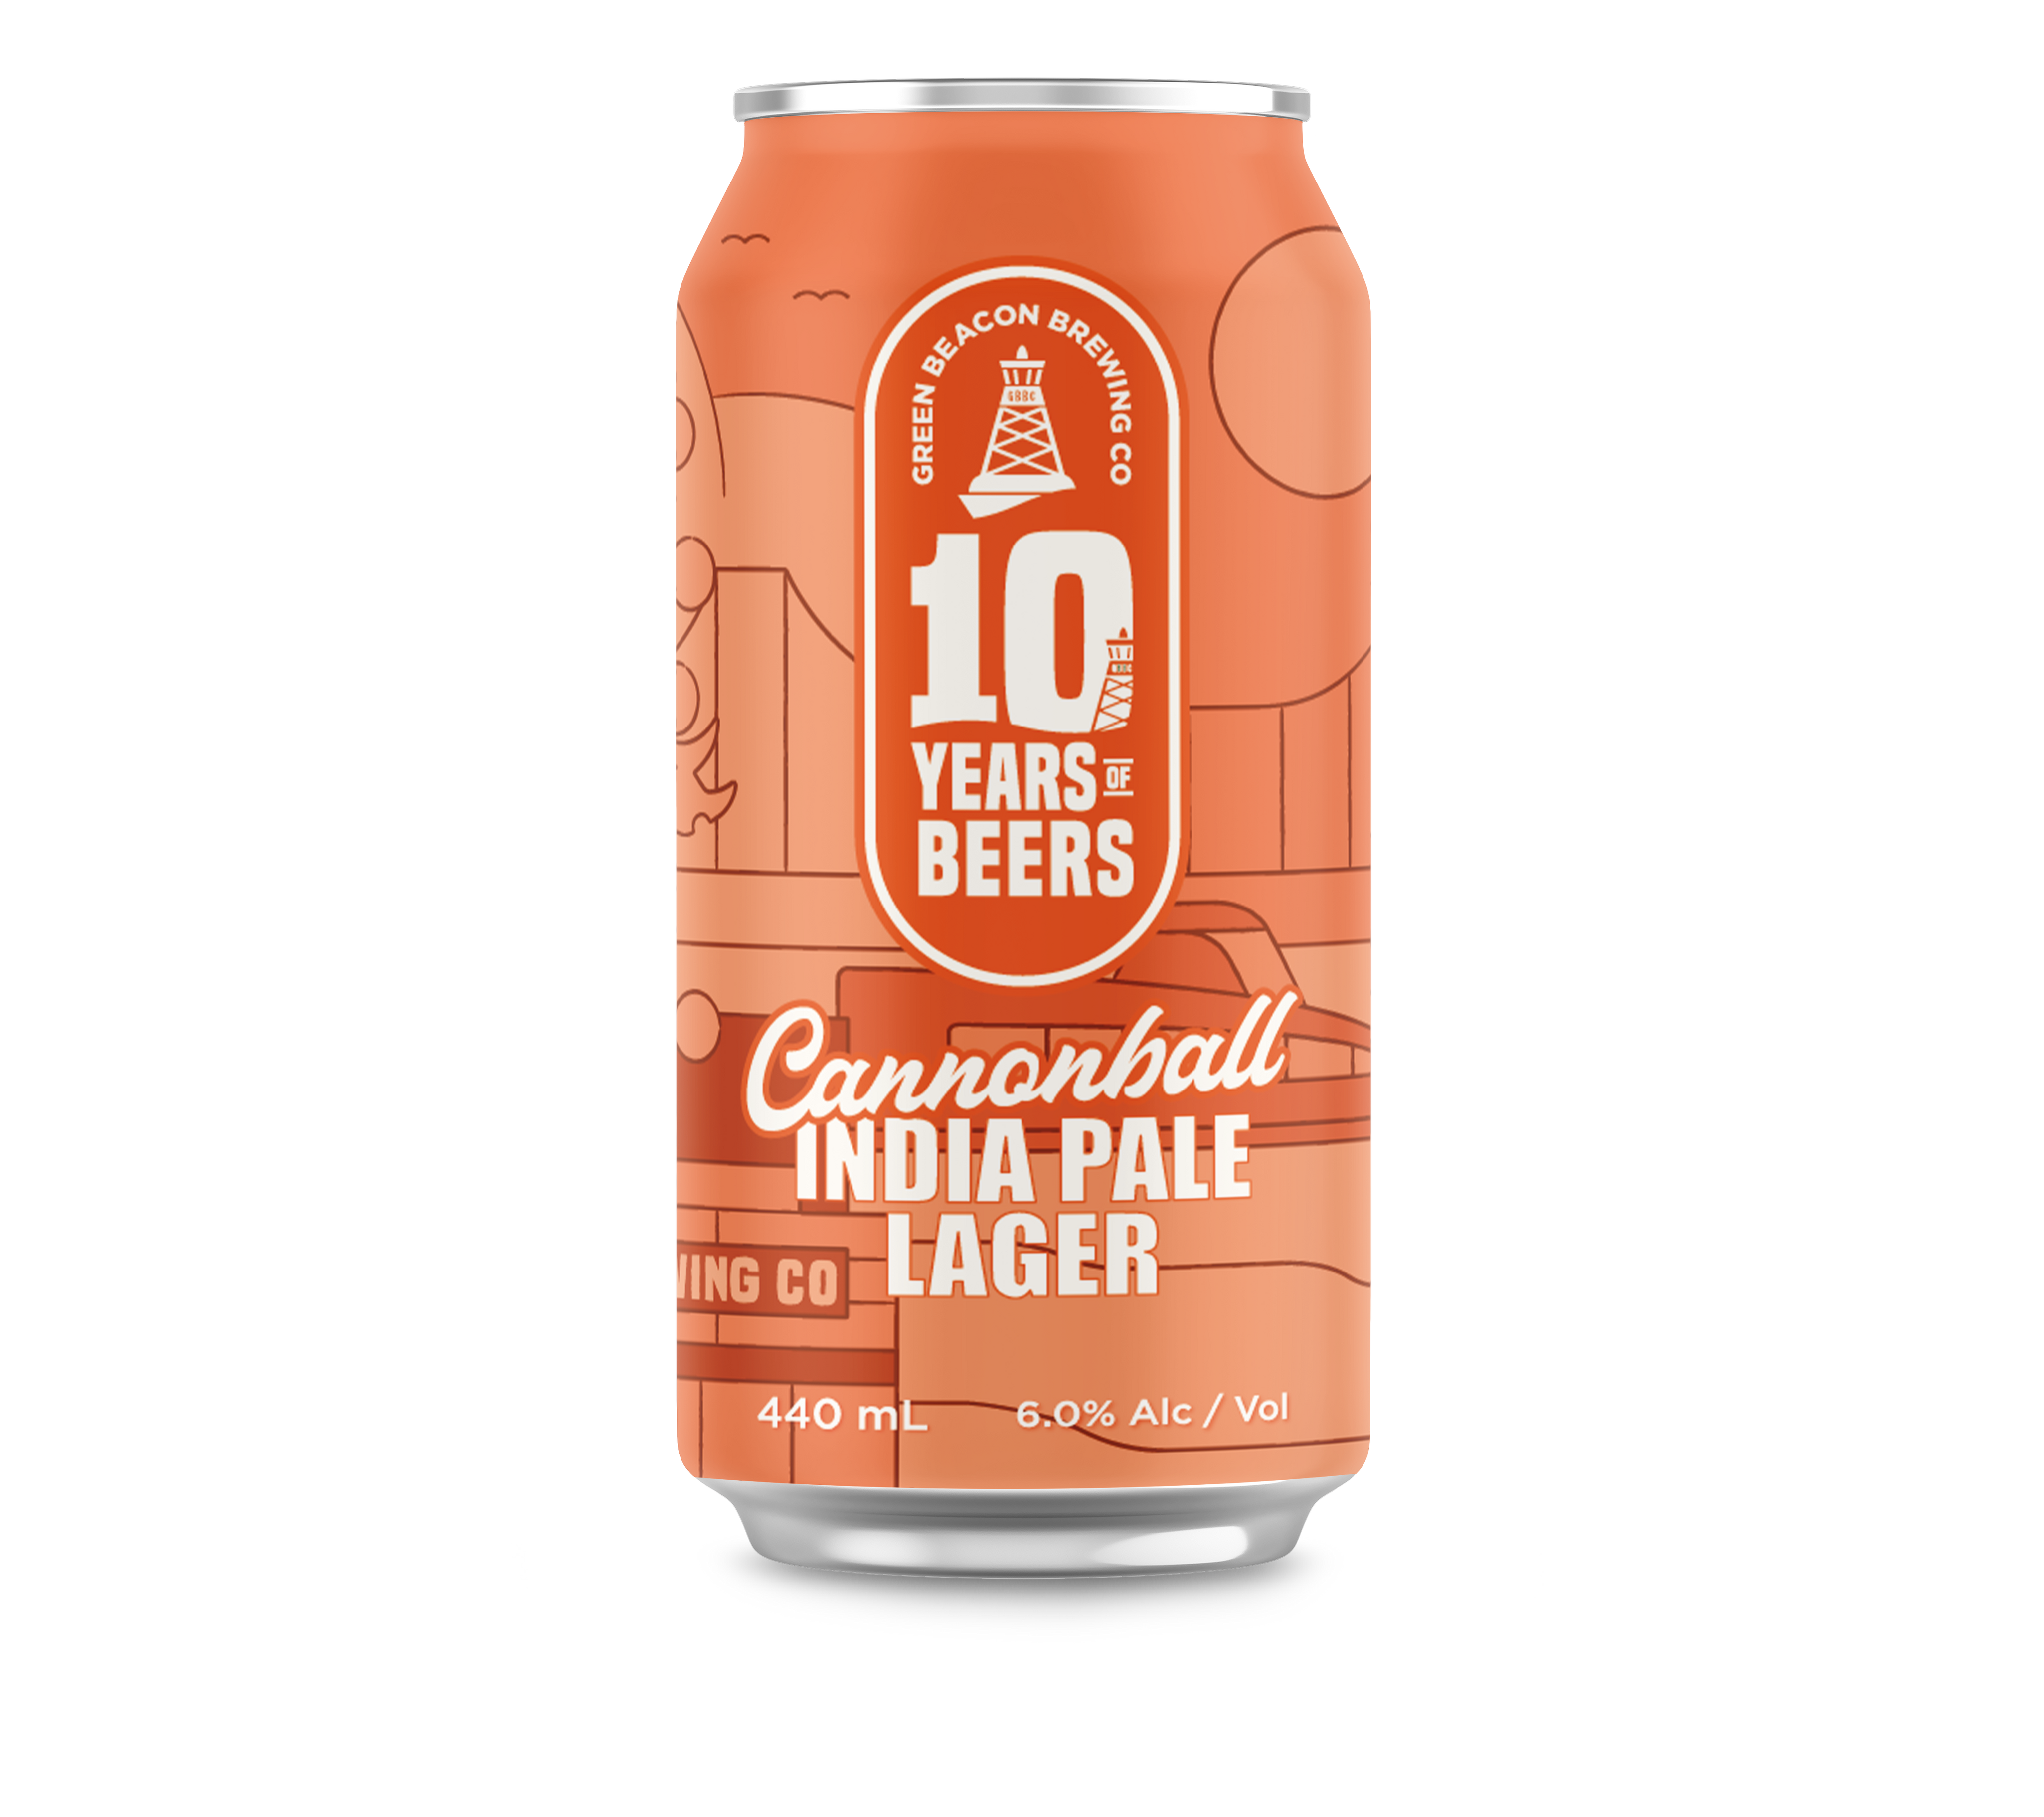 Cannonball India Pale Lager